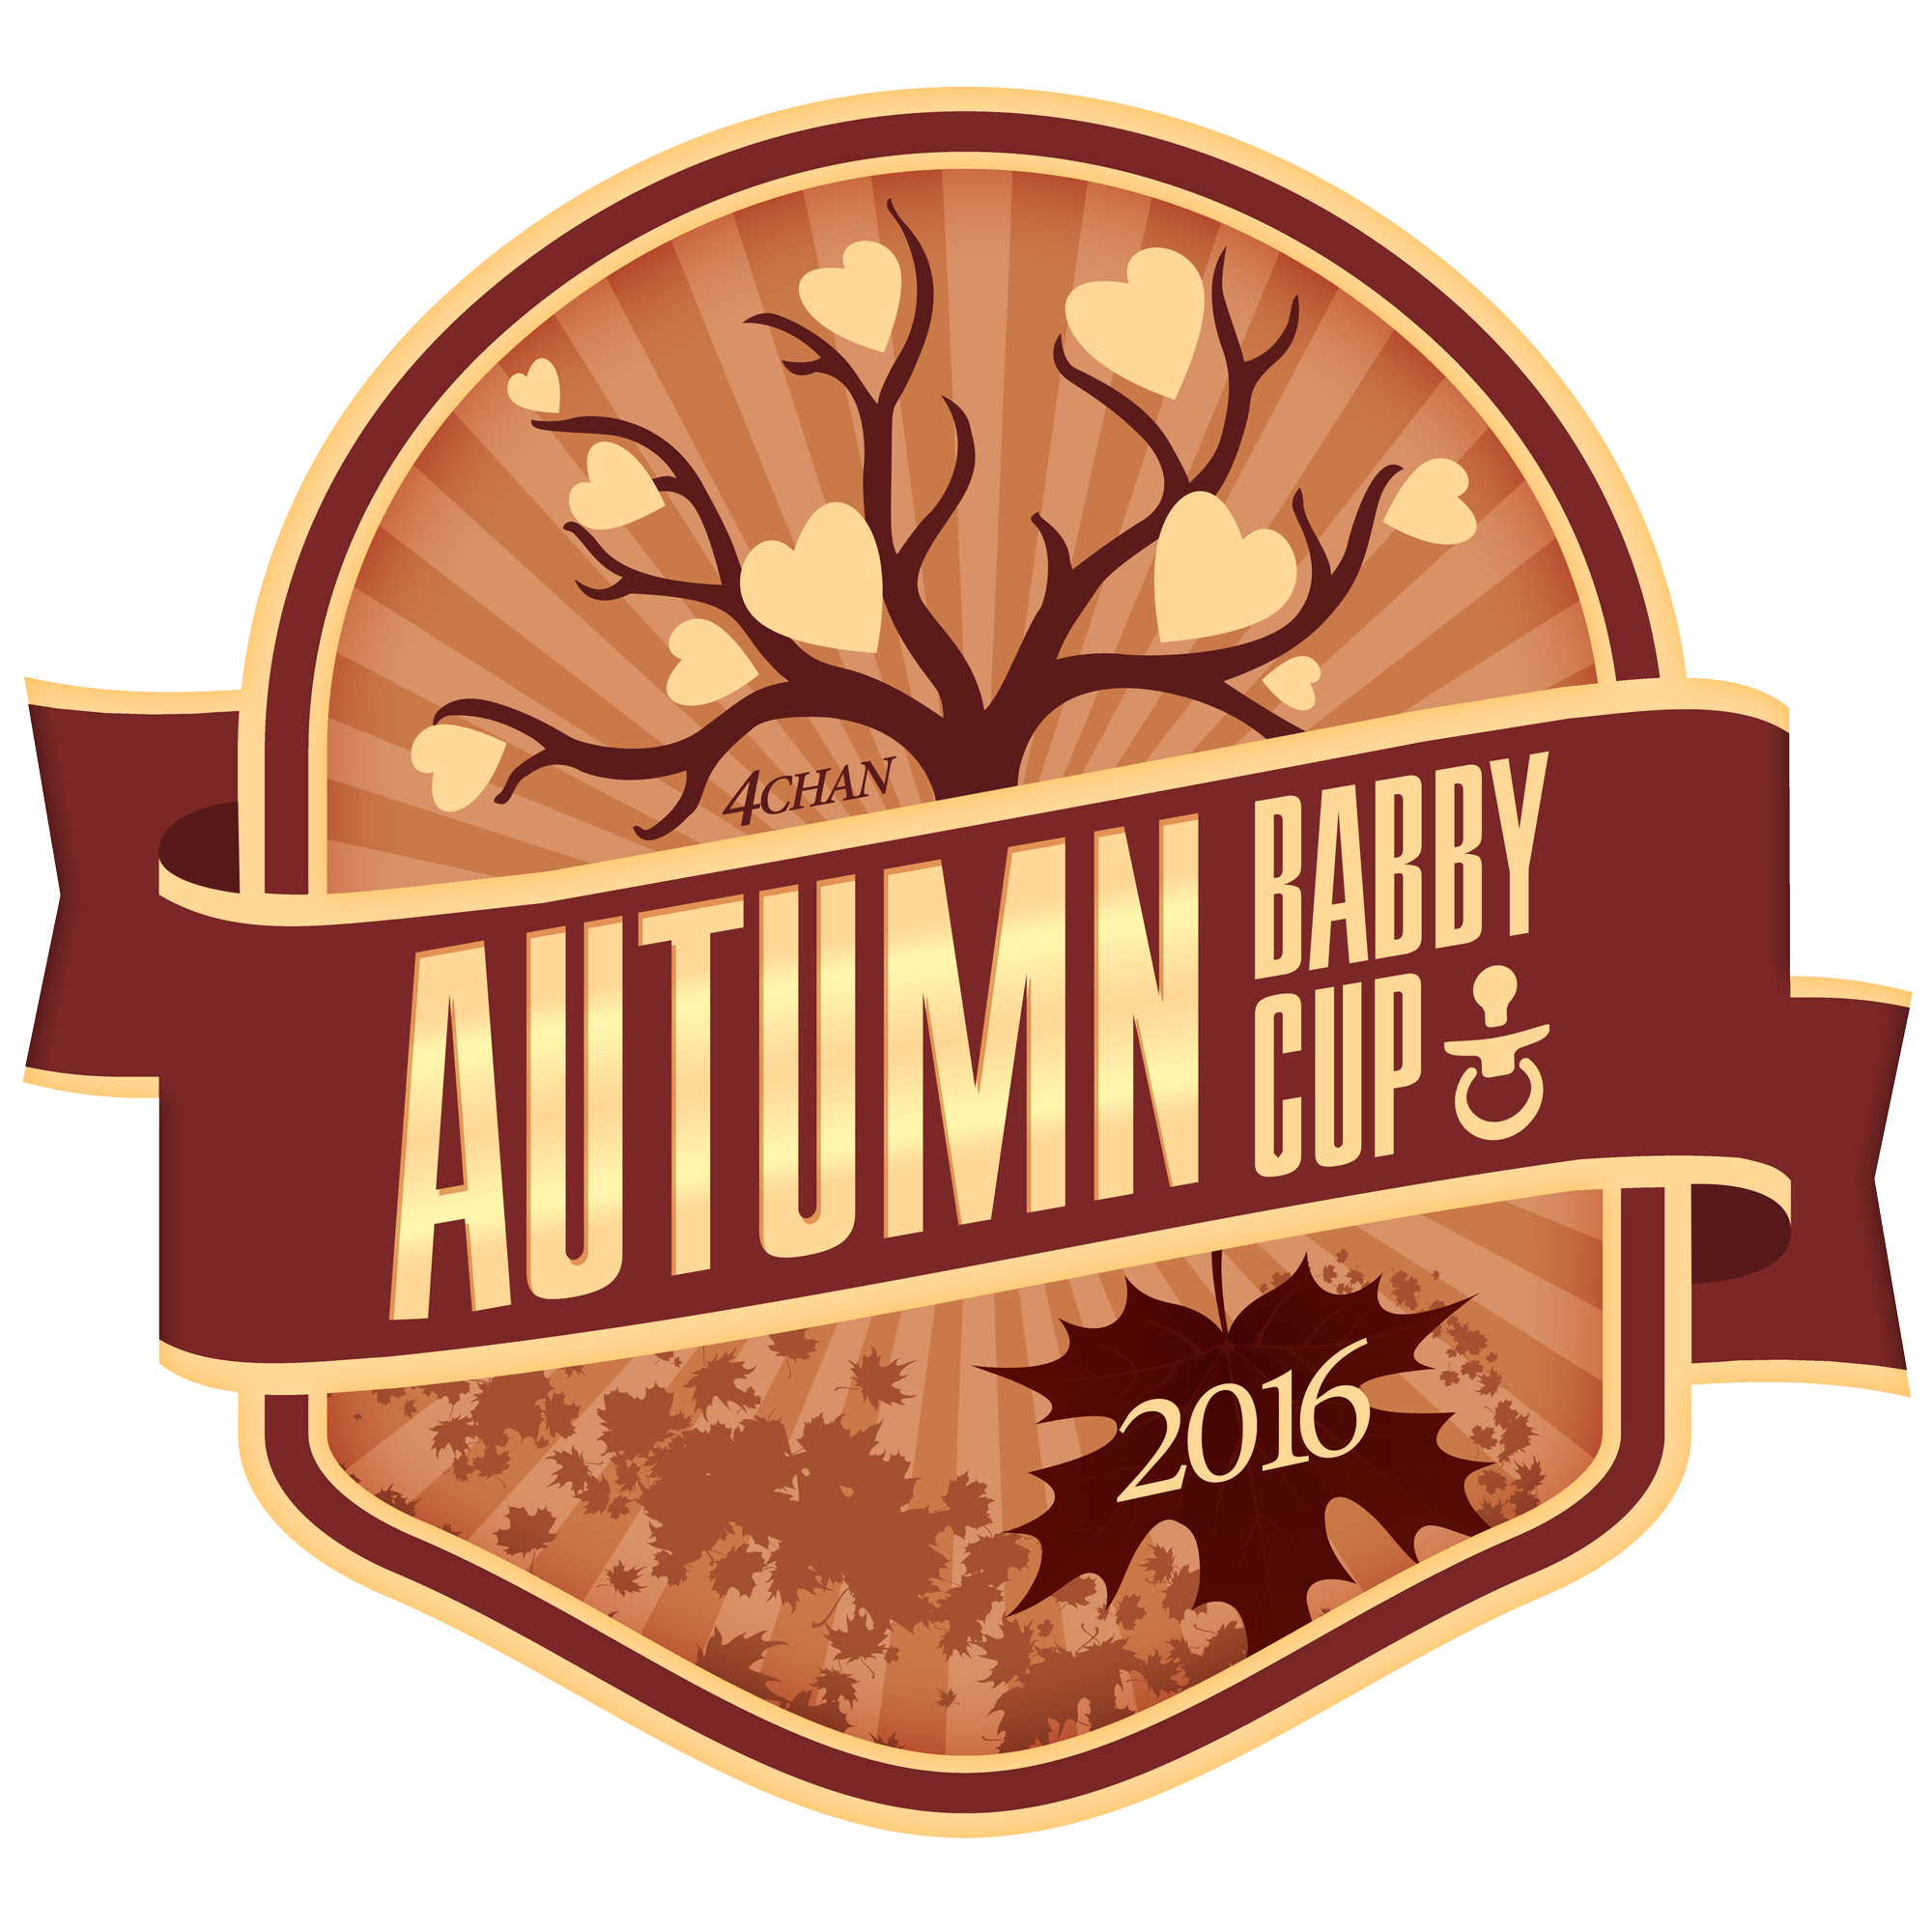 2016 4chan Autumn Babby Cup